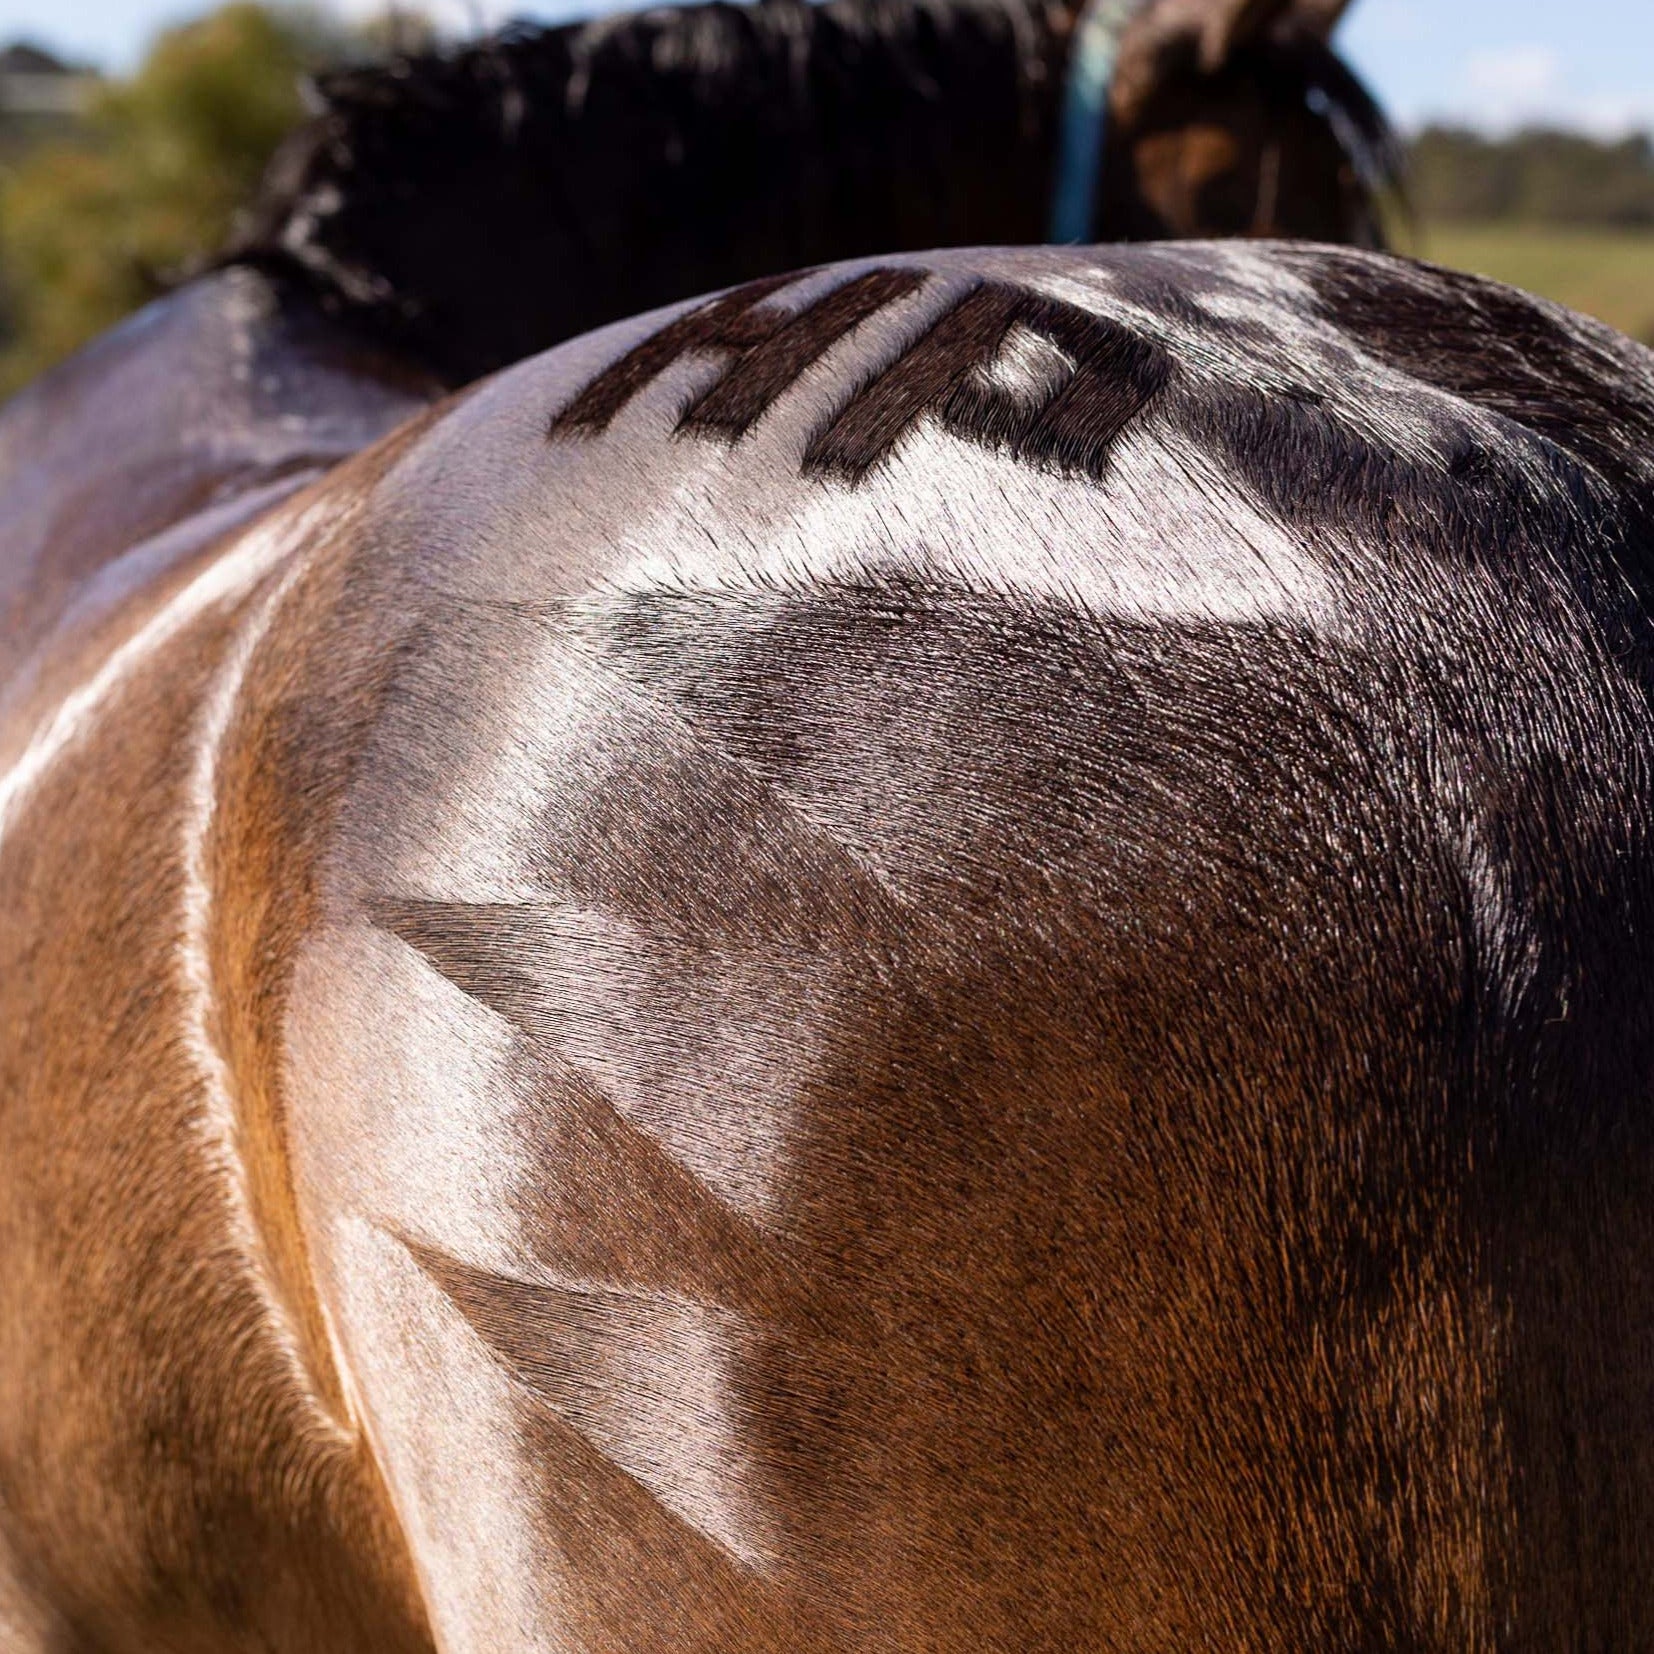 The letters "HP" in a pattern on a horse rump